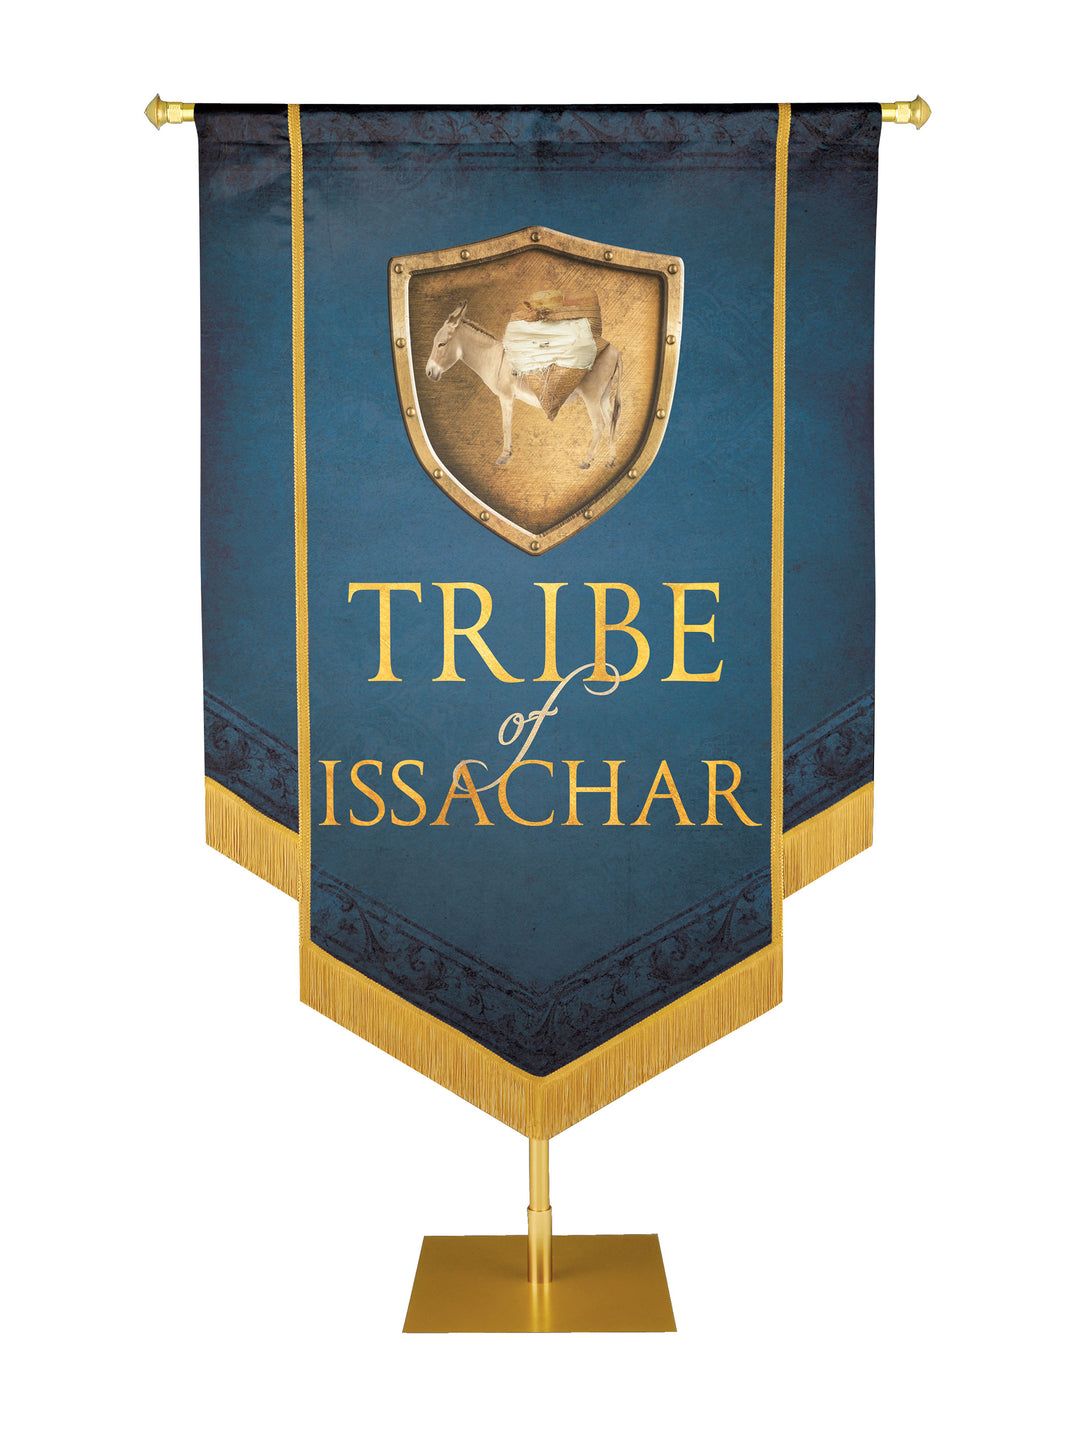 Tribe of Issachar Embellished Banner - Handcrafted Banners - PraiseBanners